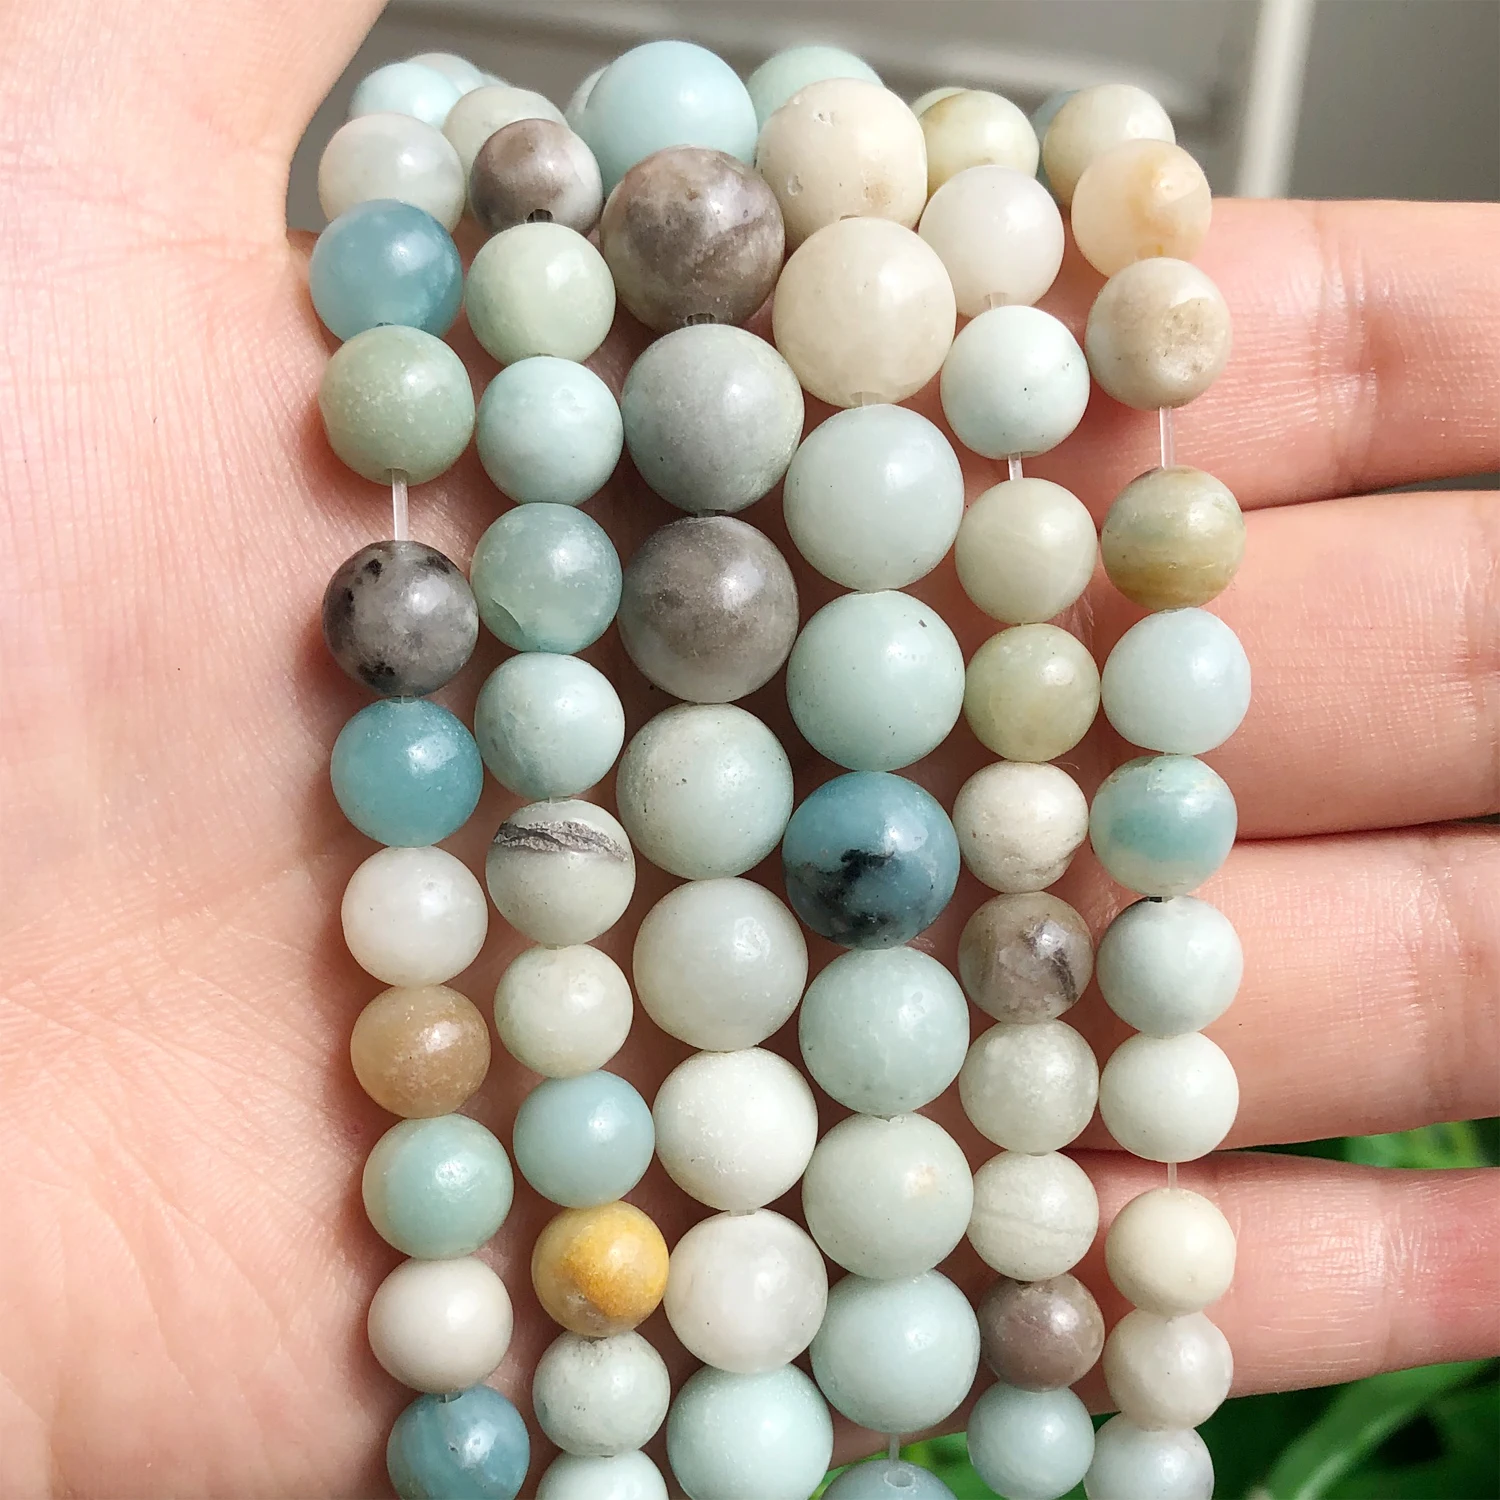 

Natural Stone Smooth Colorful Amazonite Round Bead For Jewelry Making 4 6 8 10 12mm Perles Gem Loose Beads Diy Bracelet Necklace